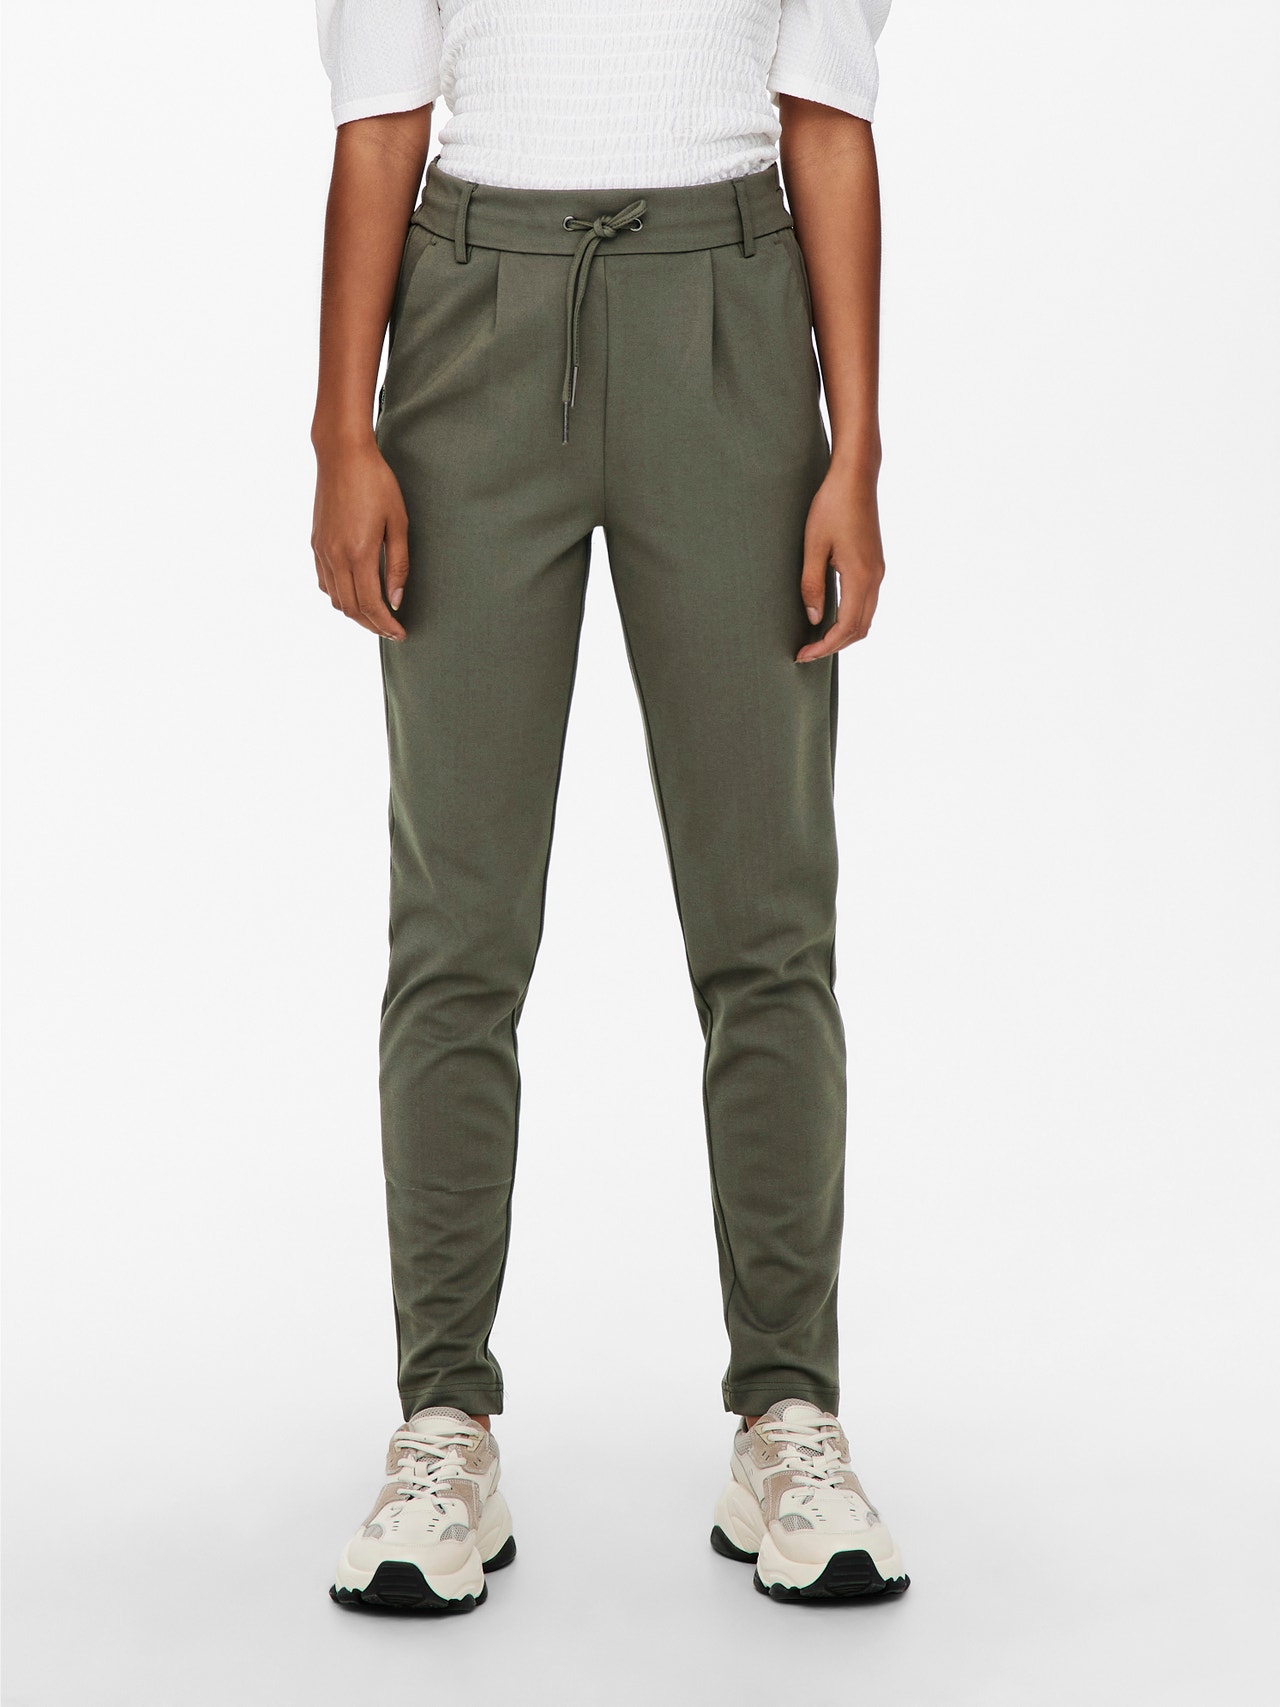 ONLY Regular Fit Trousers -Bungee Cord - 15115847